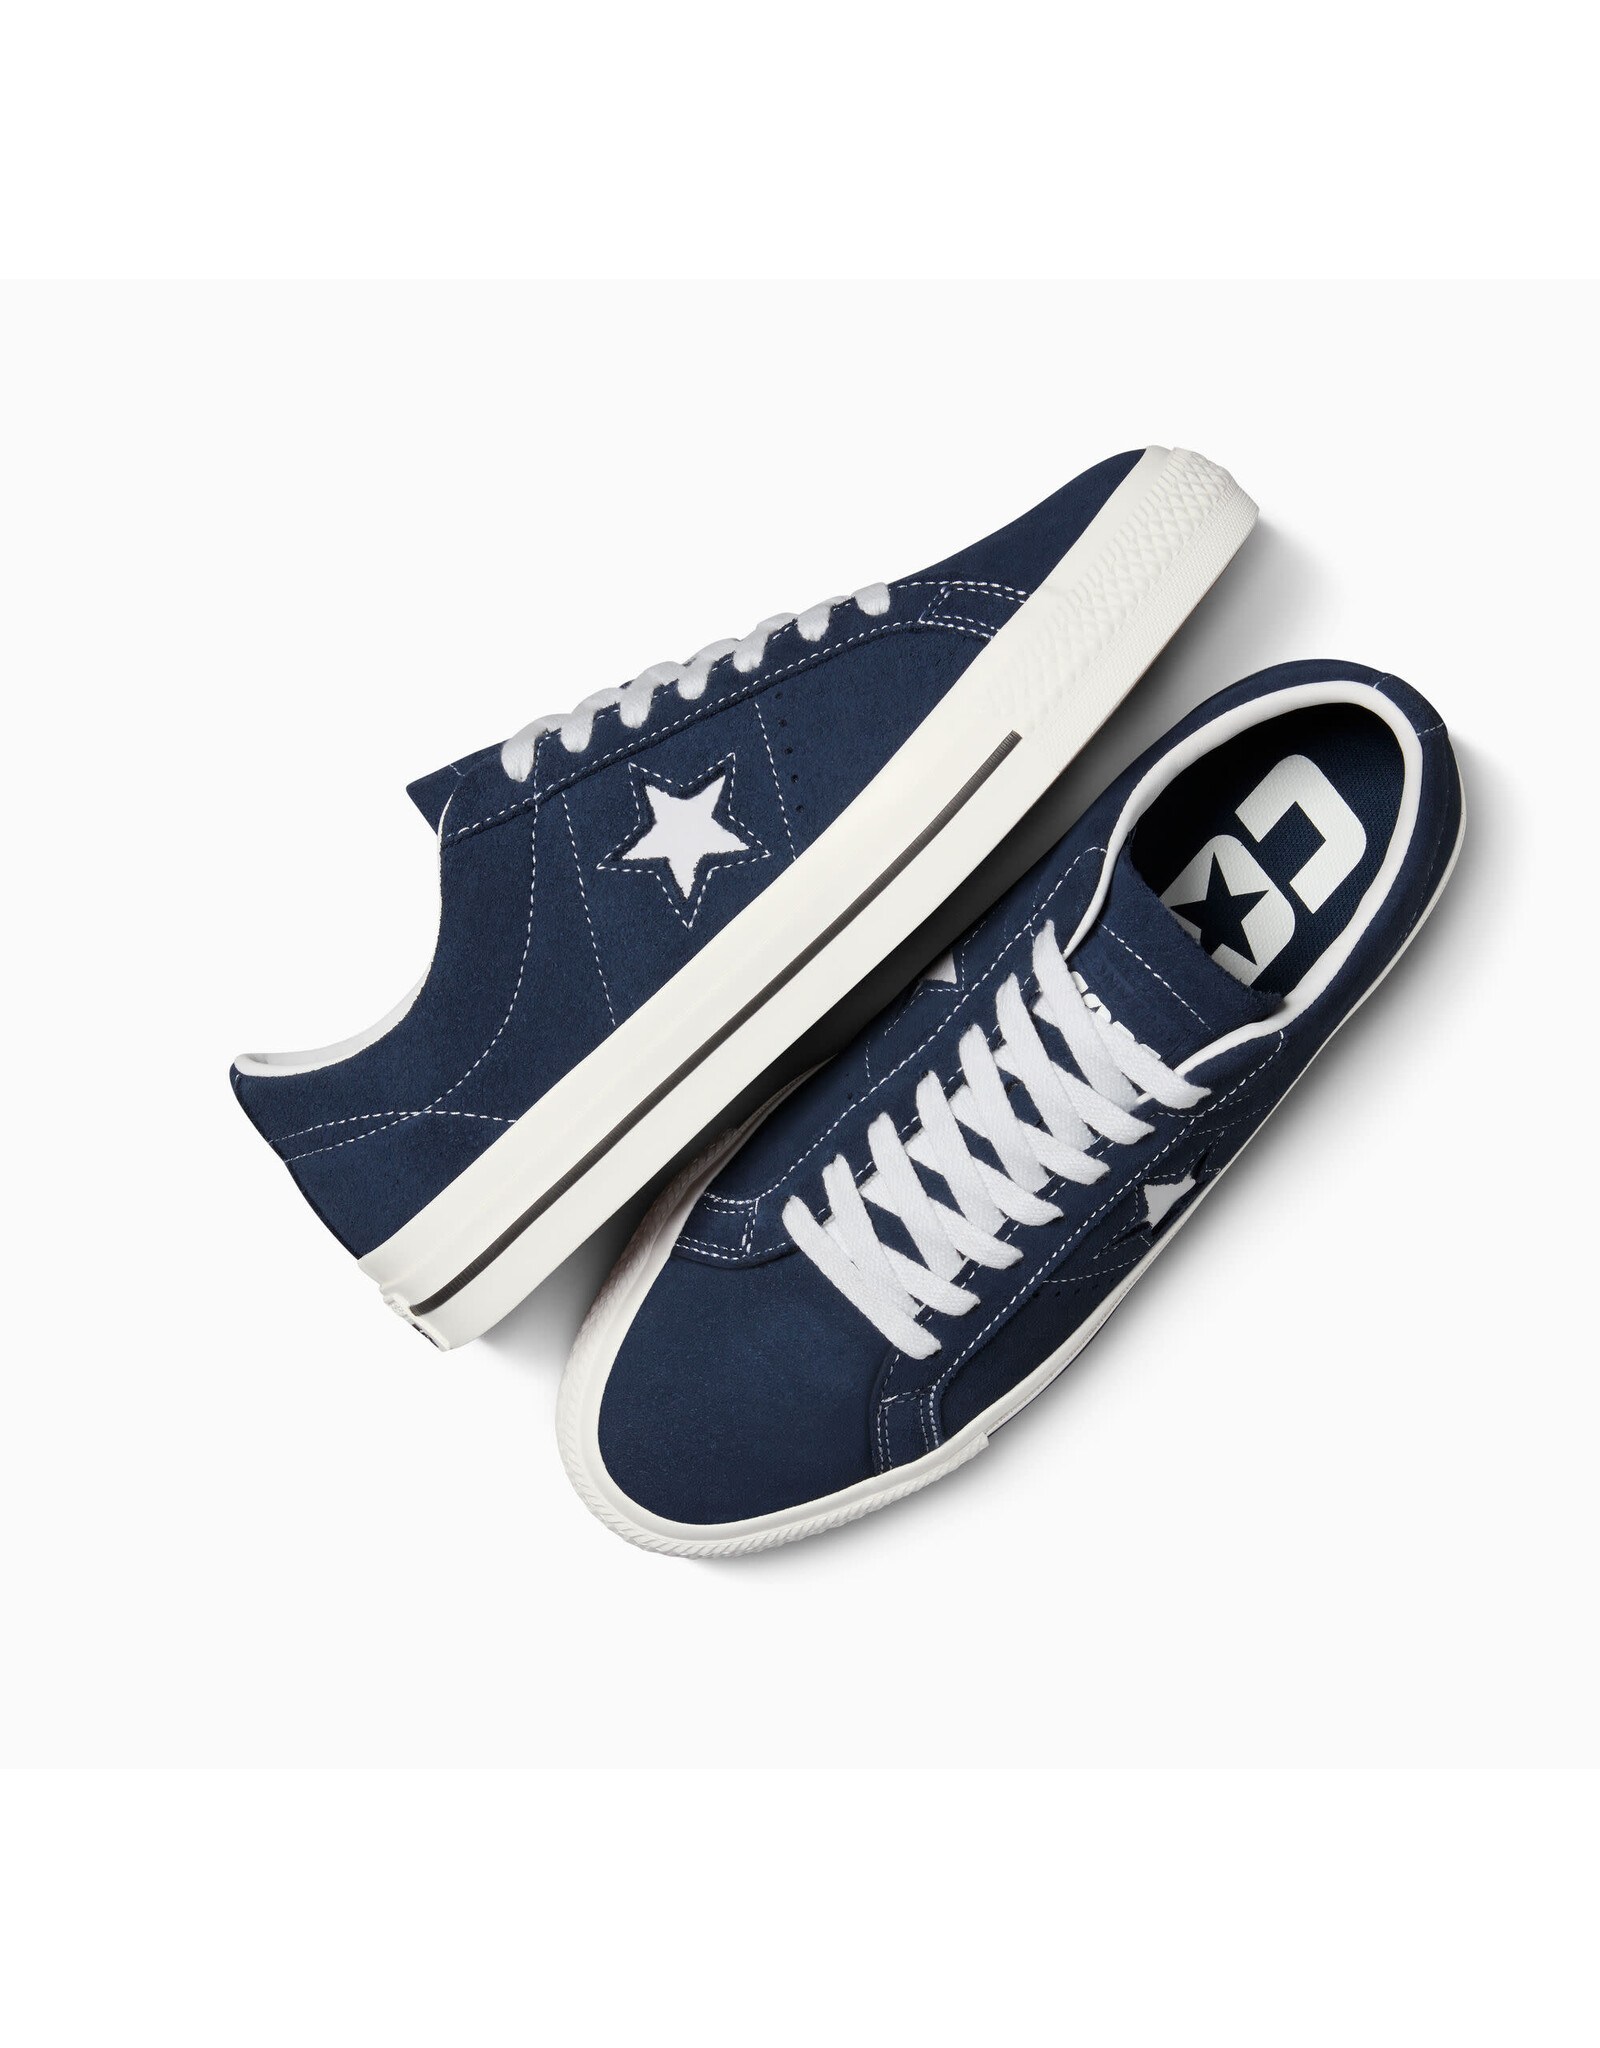 ONE STAR PRO CLASSIC SUEDE NAVY/WHITE/BLACK C387N - A04154C